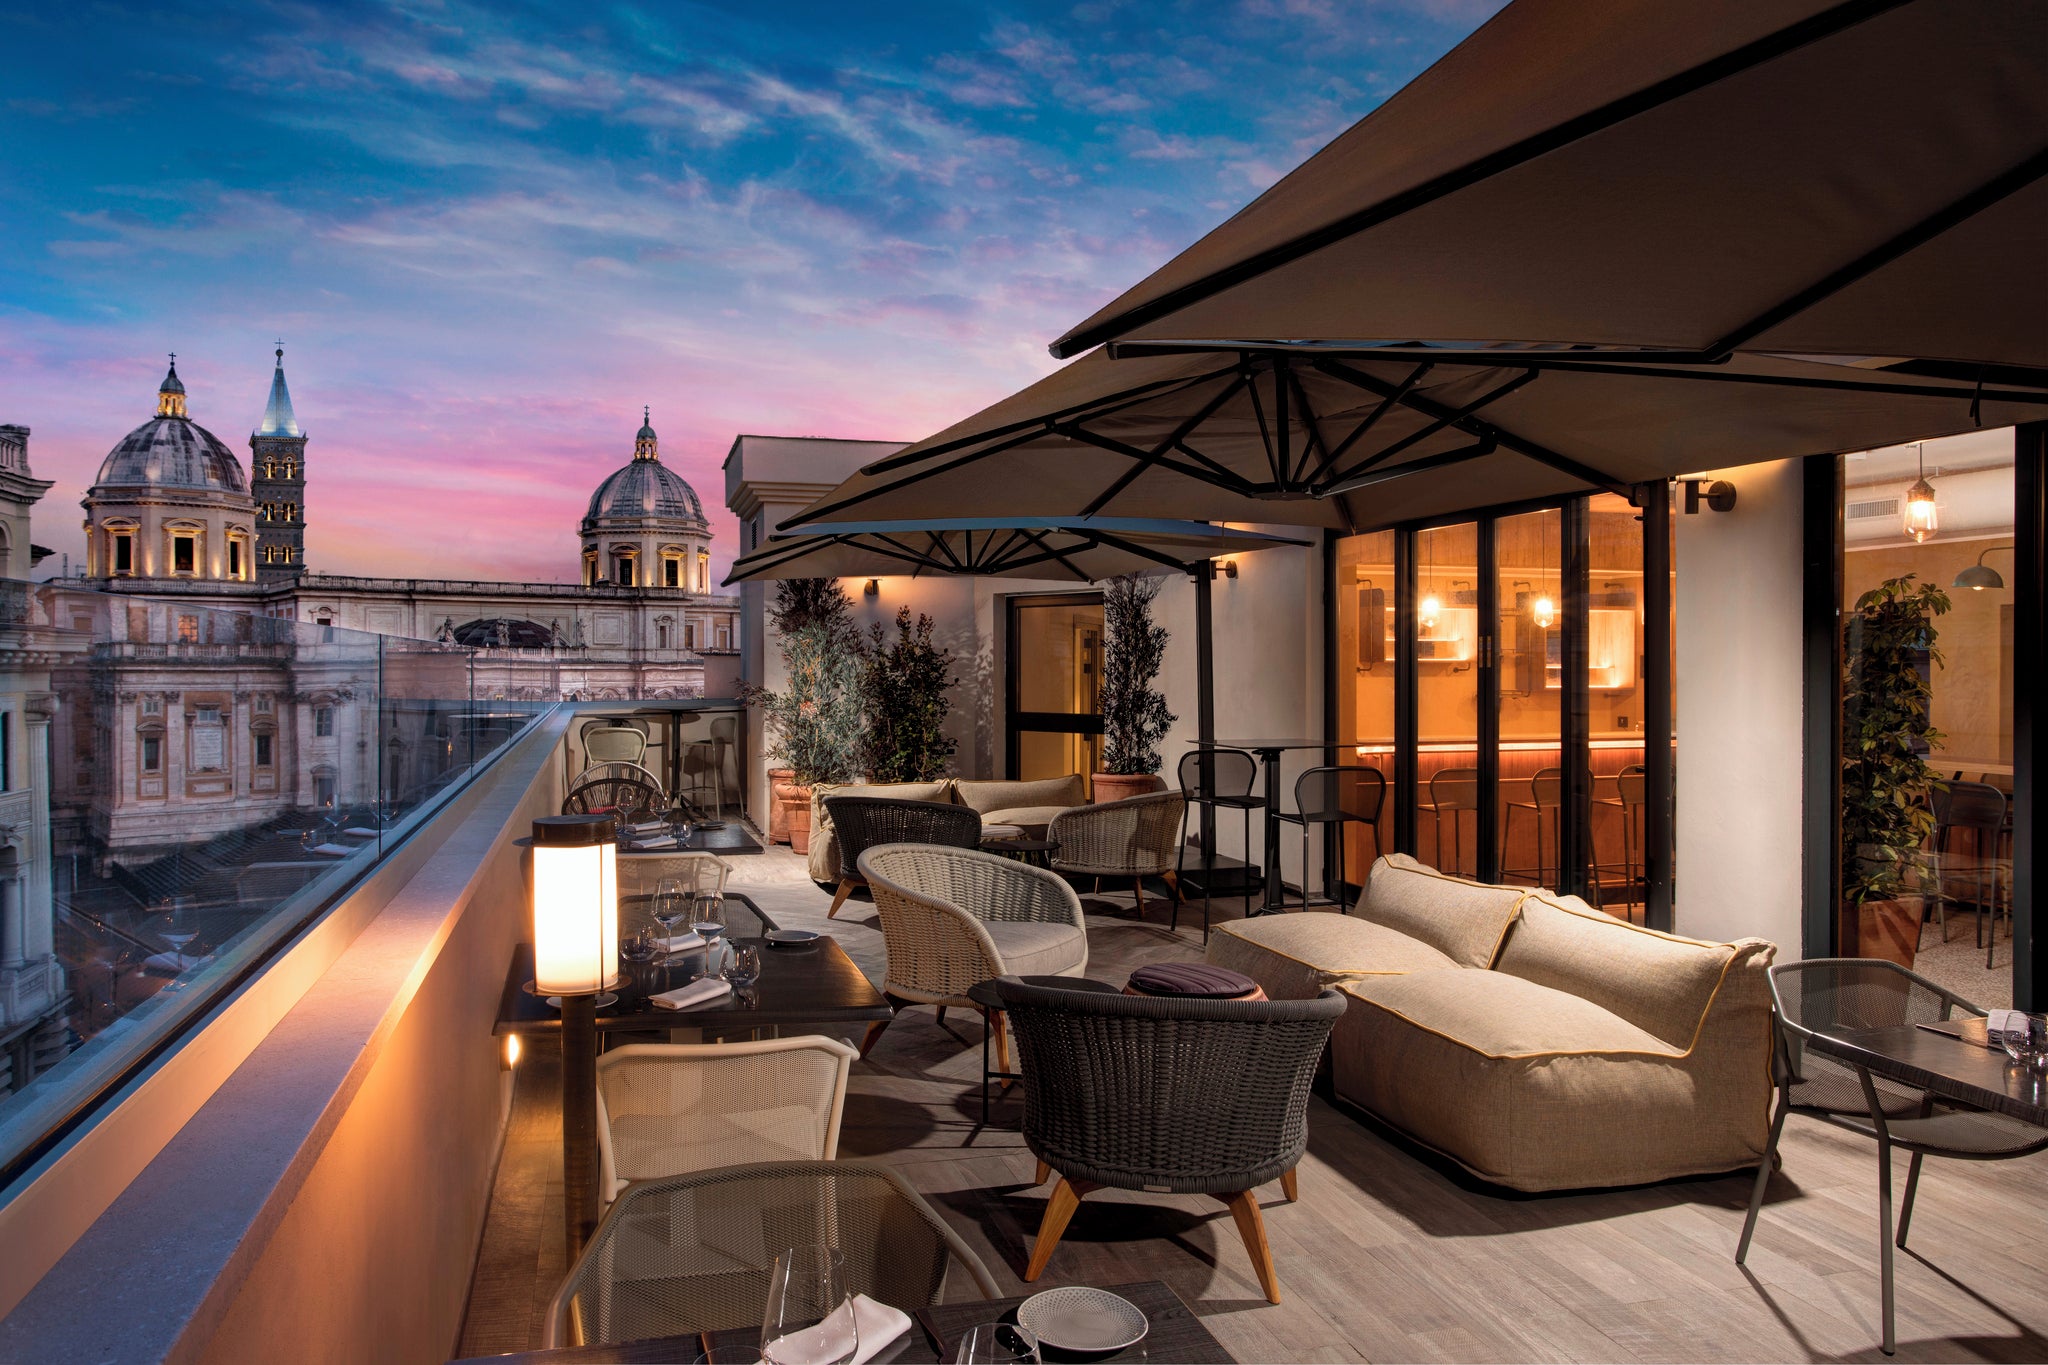 Enjoy a city break with a difference via a seasonal escapade, such as a stay at the DoubleTree by Hilton Rome Monti